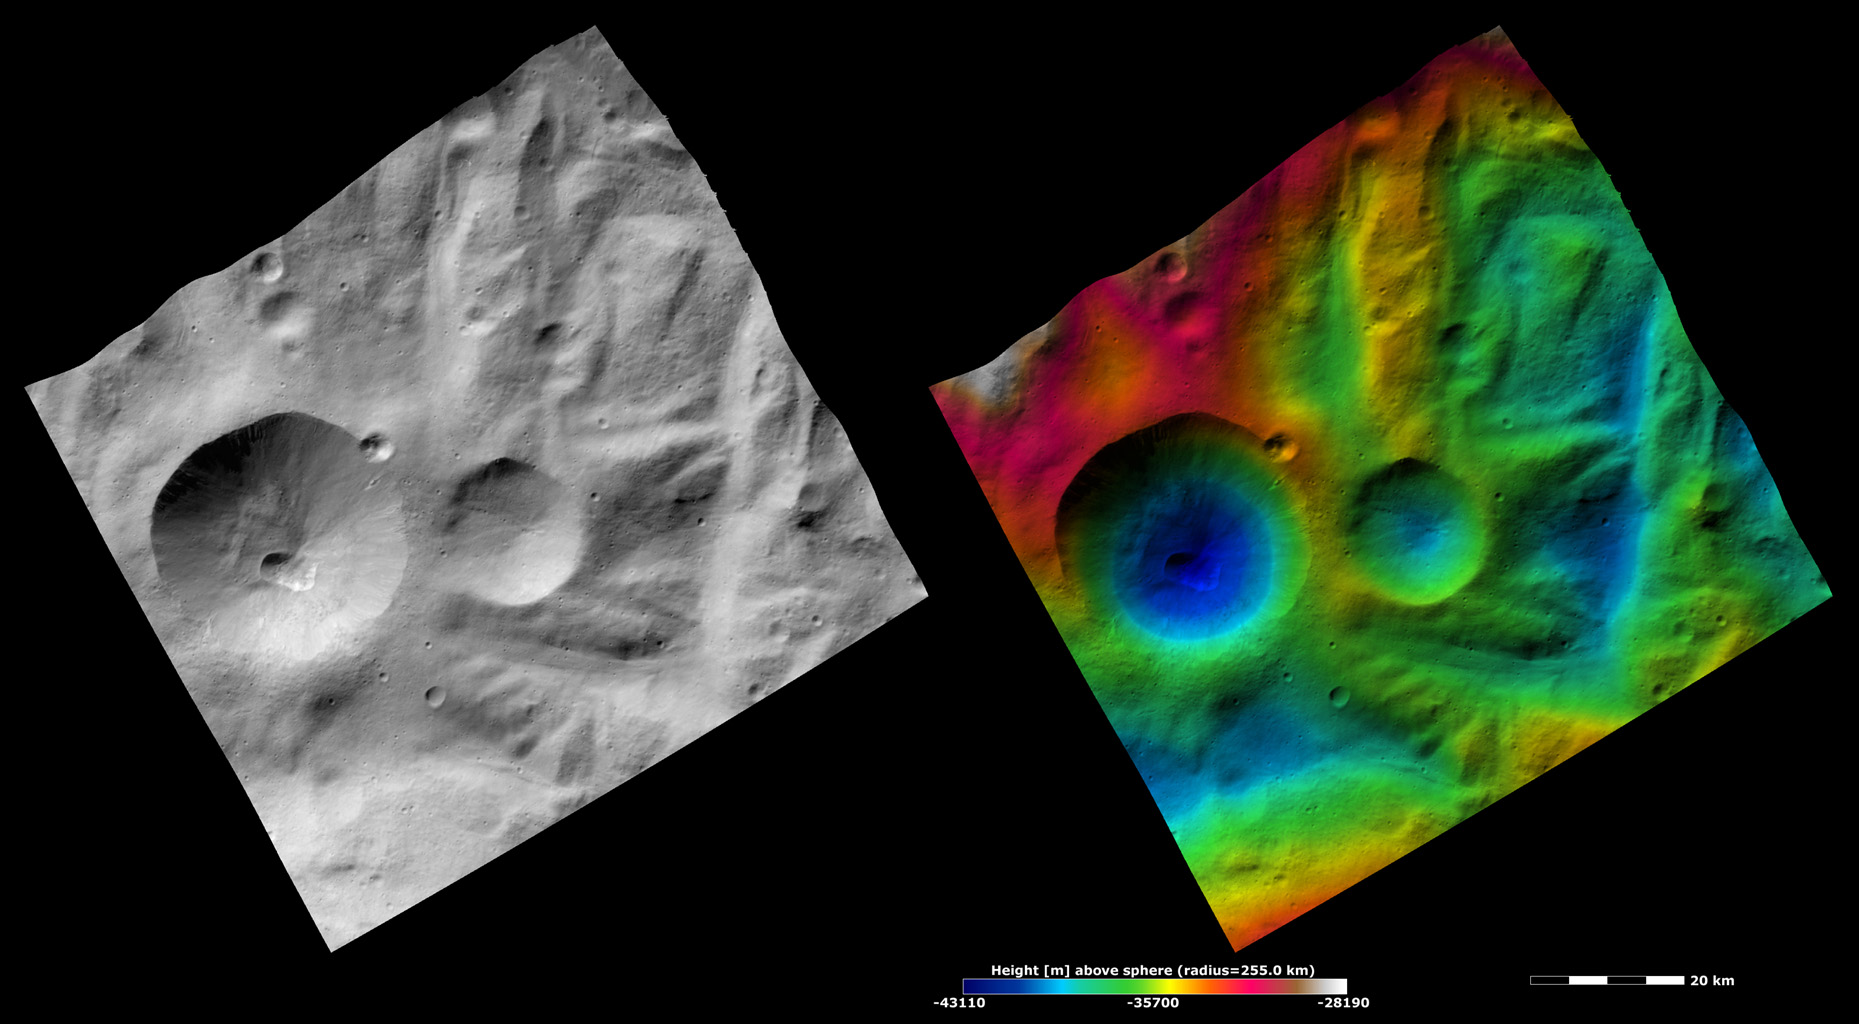 Apparent Brightness and Topography Images of Severina Crater